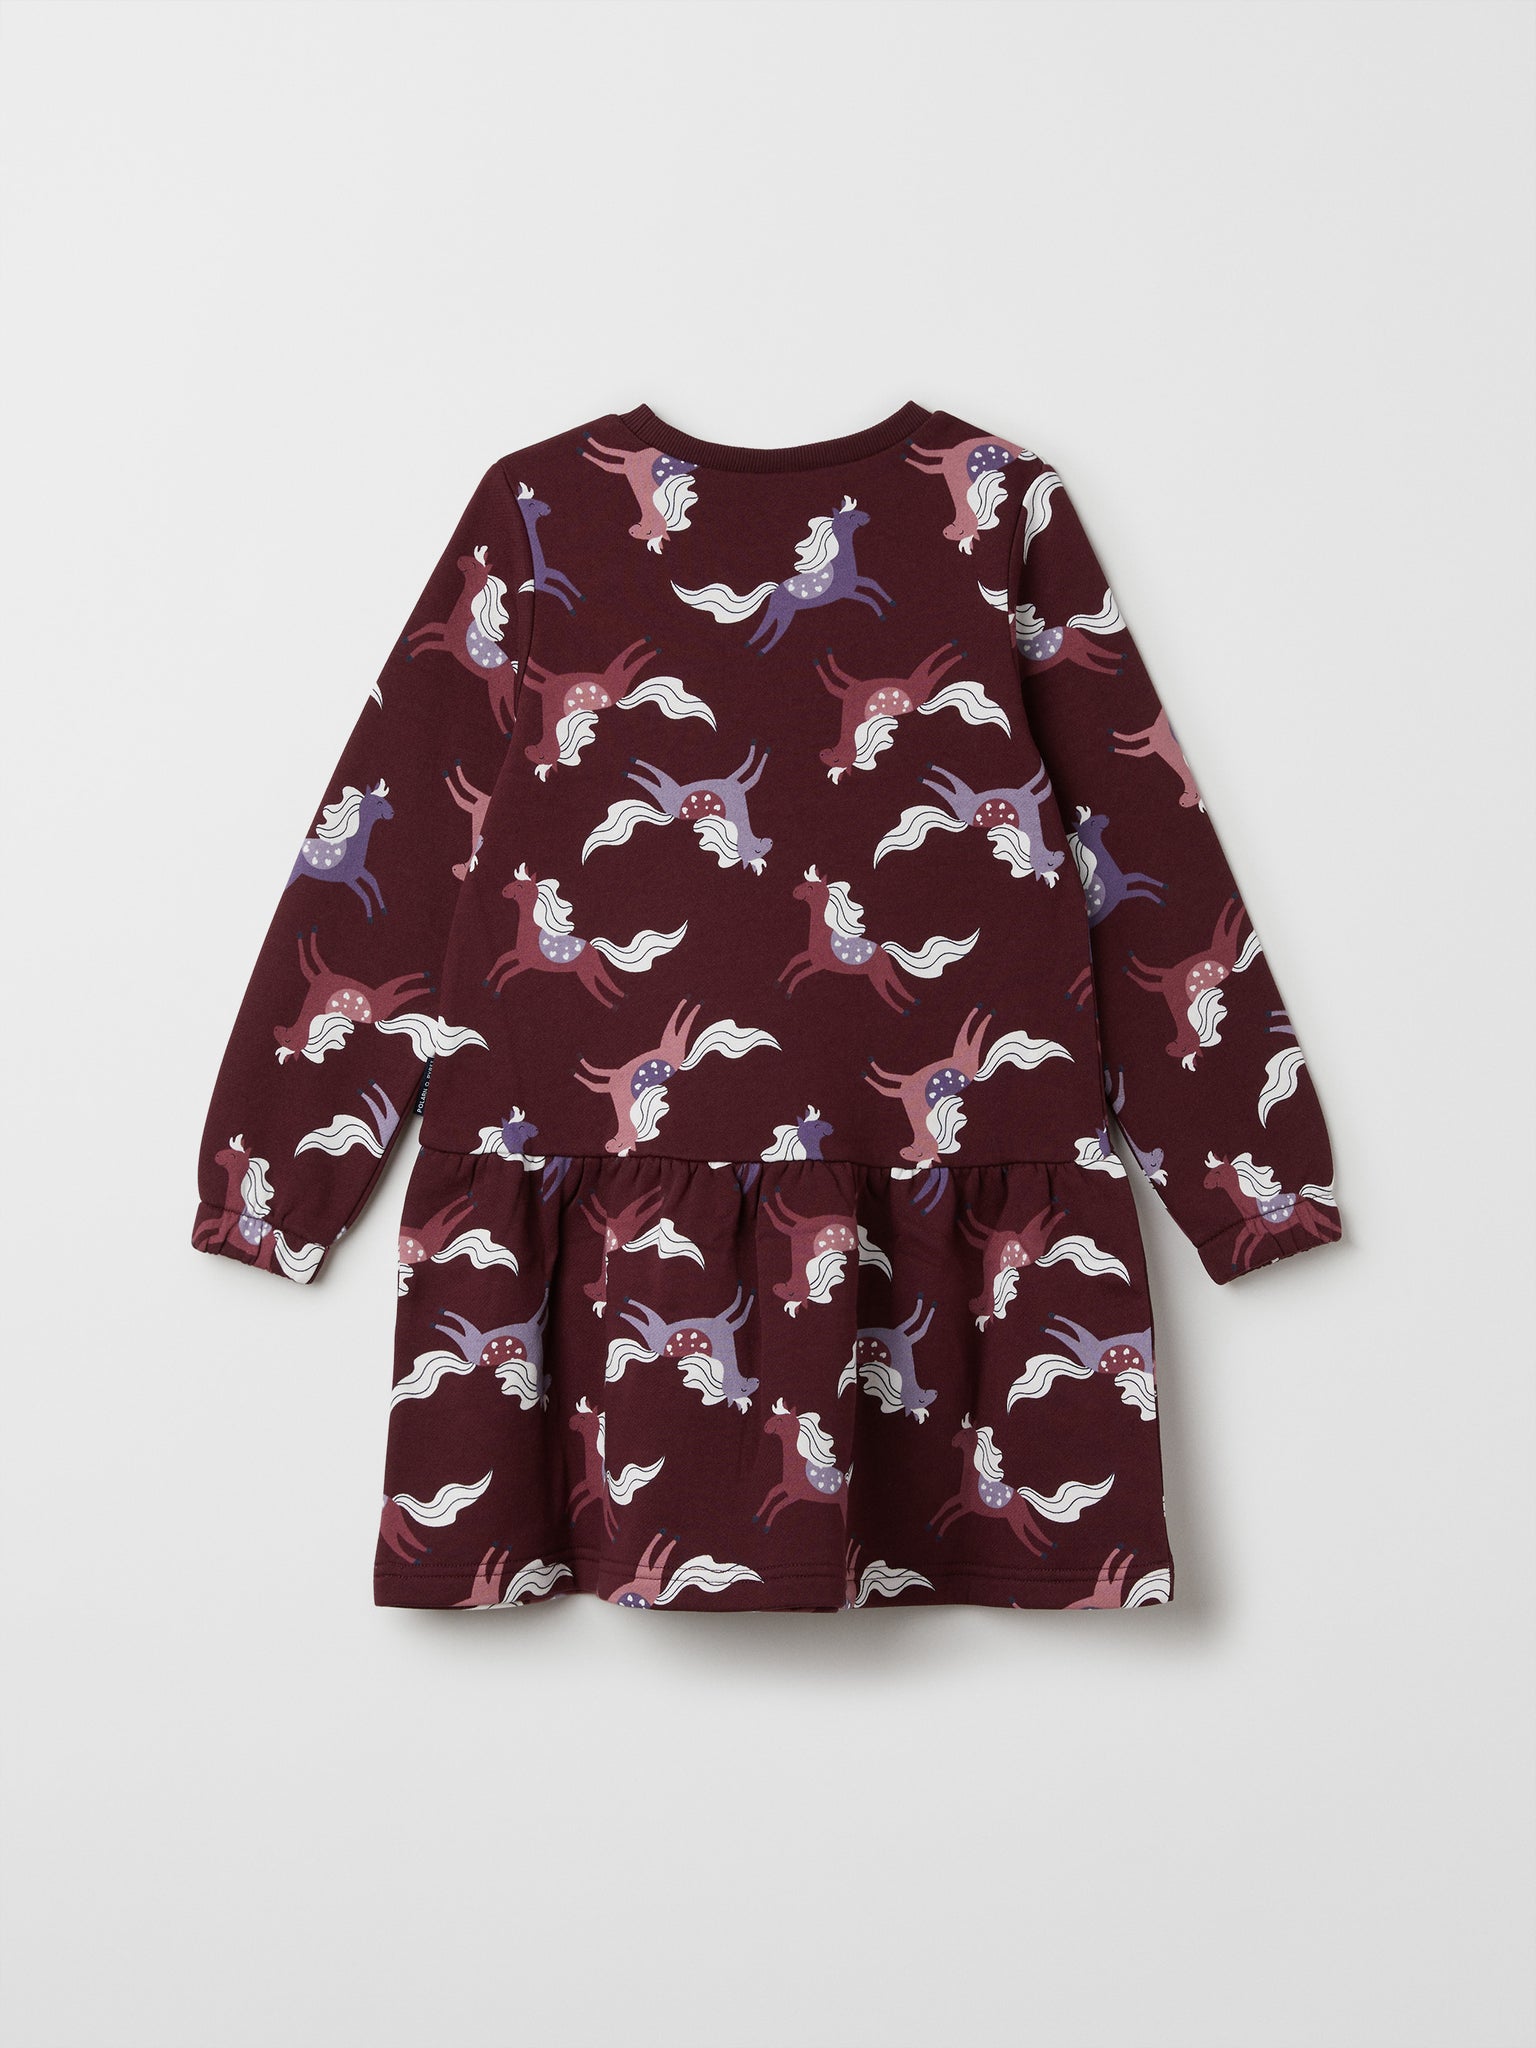 Horse Print Organic Cotton Kids Dress from the Polarn O. Pyret kids collection. Made using 100% GOTS Organic Cotton